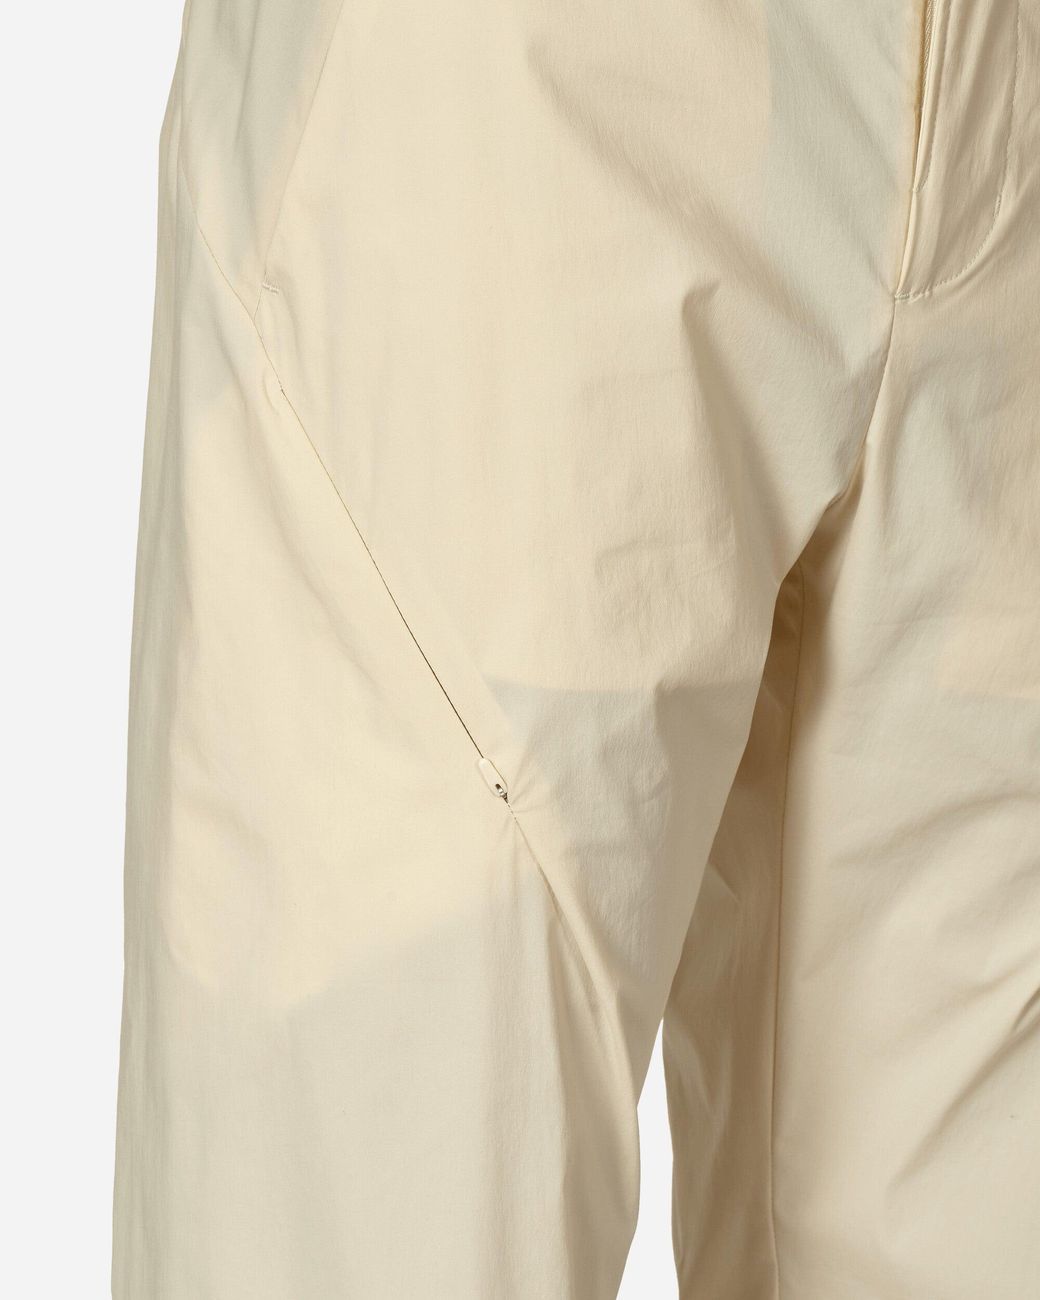 Post Archive Faction PAF 5.0+ Technical Pants Right Ivory in